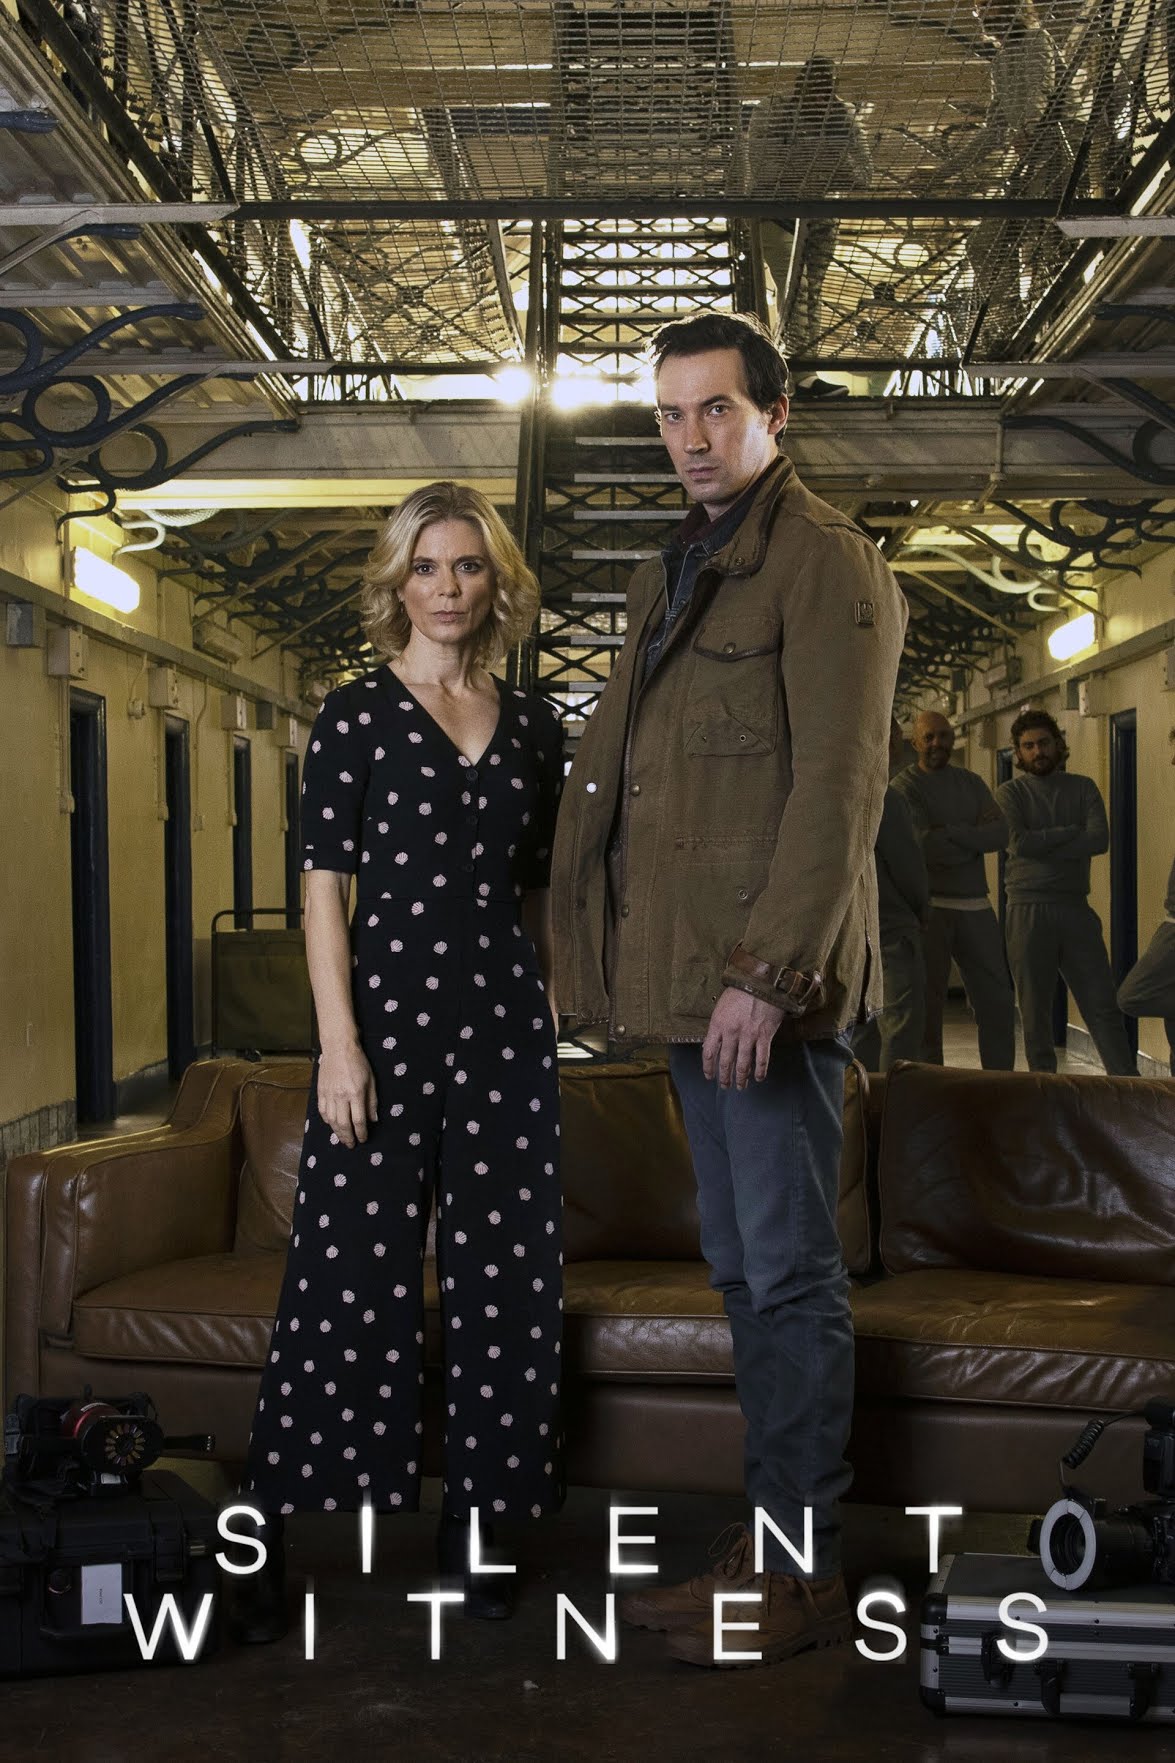 Silent Witness S24E04 Bad Love Part 2 H264 1080p 6ch